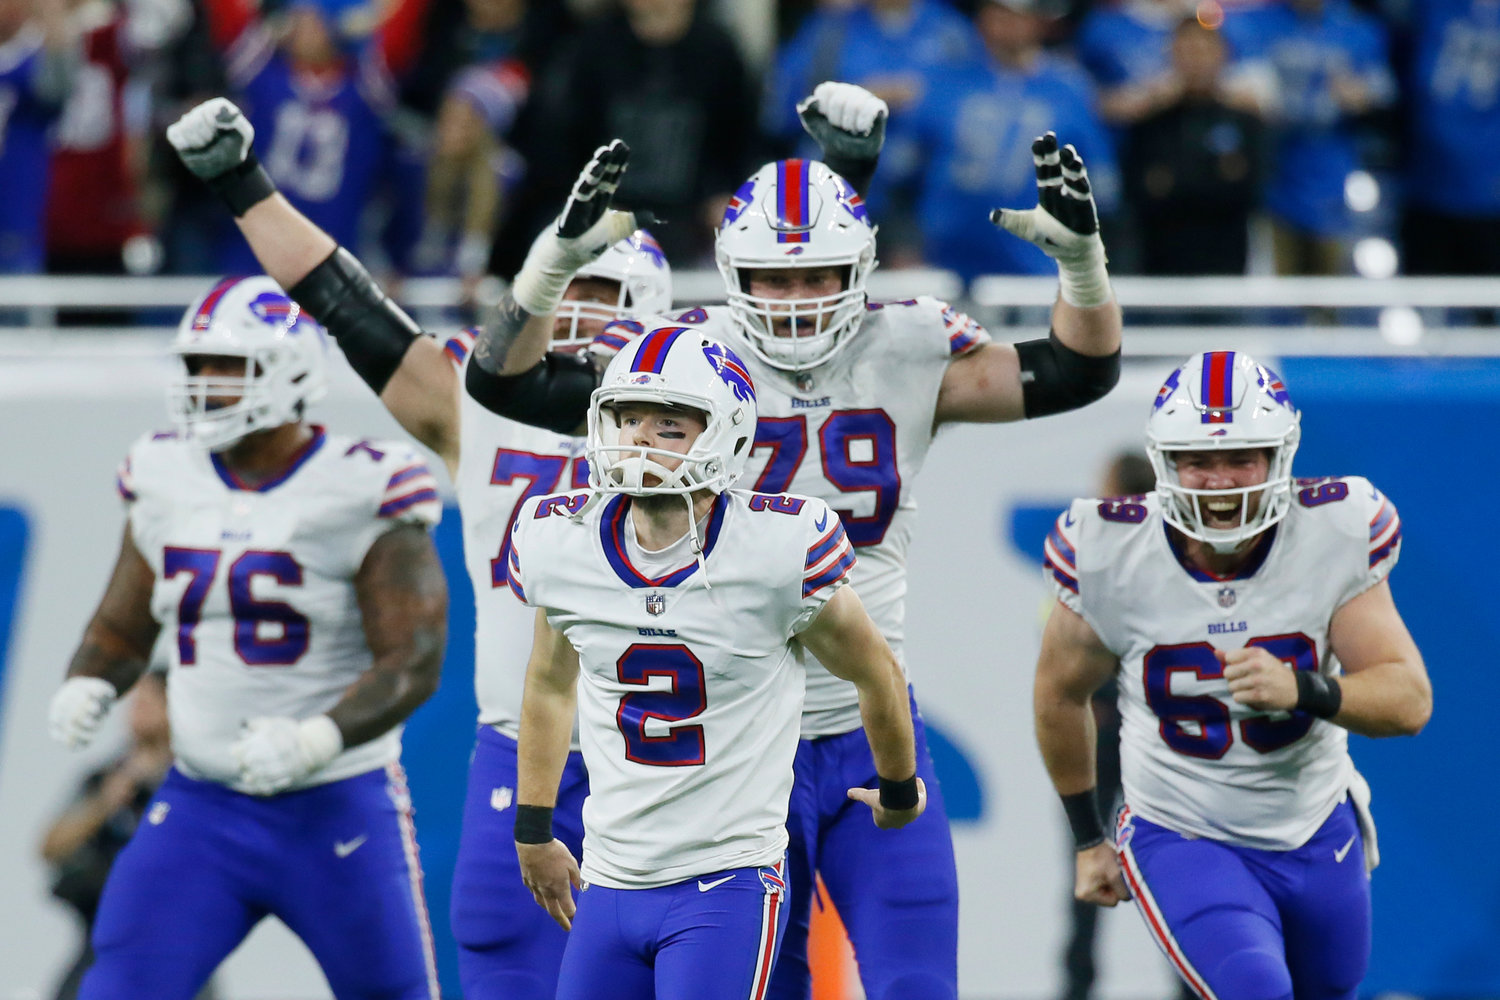 Teammates react after Buffalo Bills place kicker Tyler Bass (2) kicked a 45-yard game winning field goal in the closing seconds of a game against the Detroit Lions on Thursday afternoon in Detroit. The Bills won 28-25.